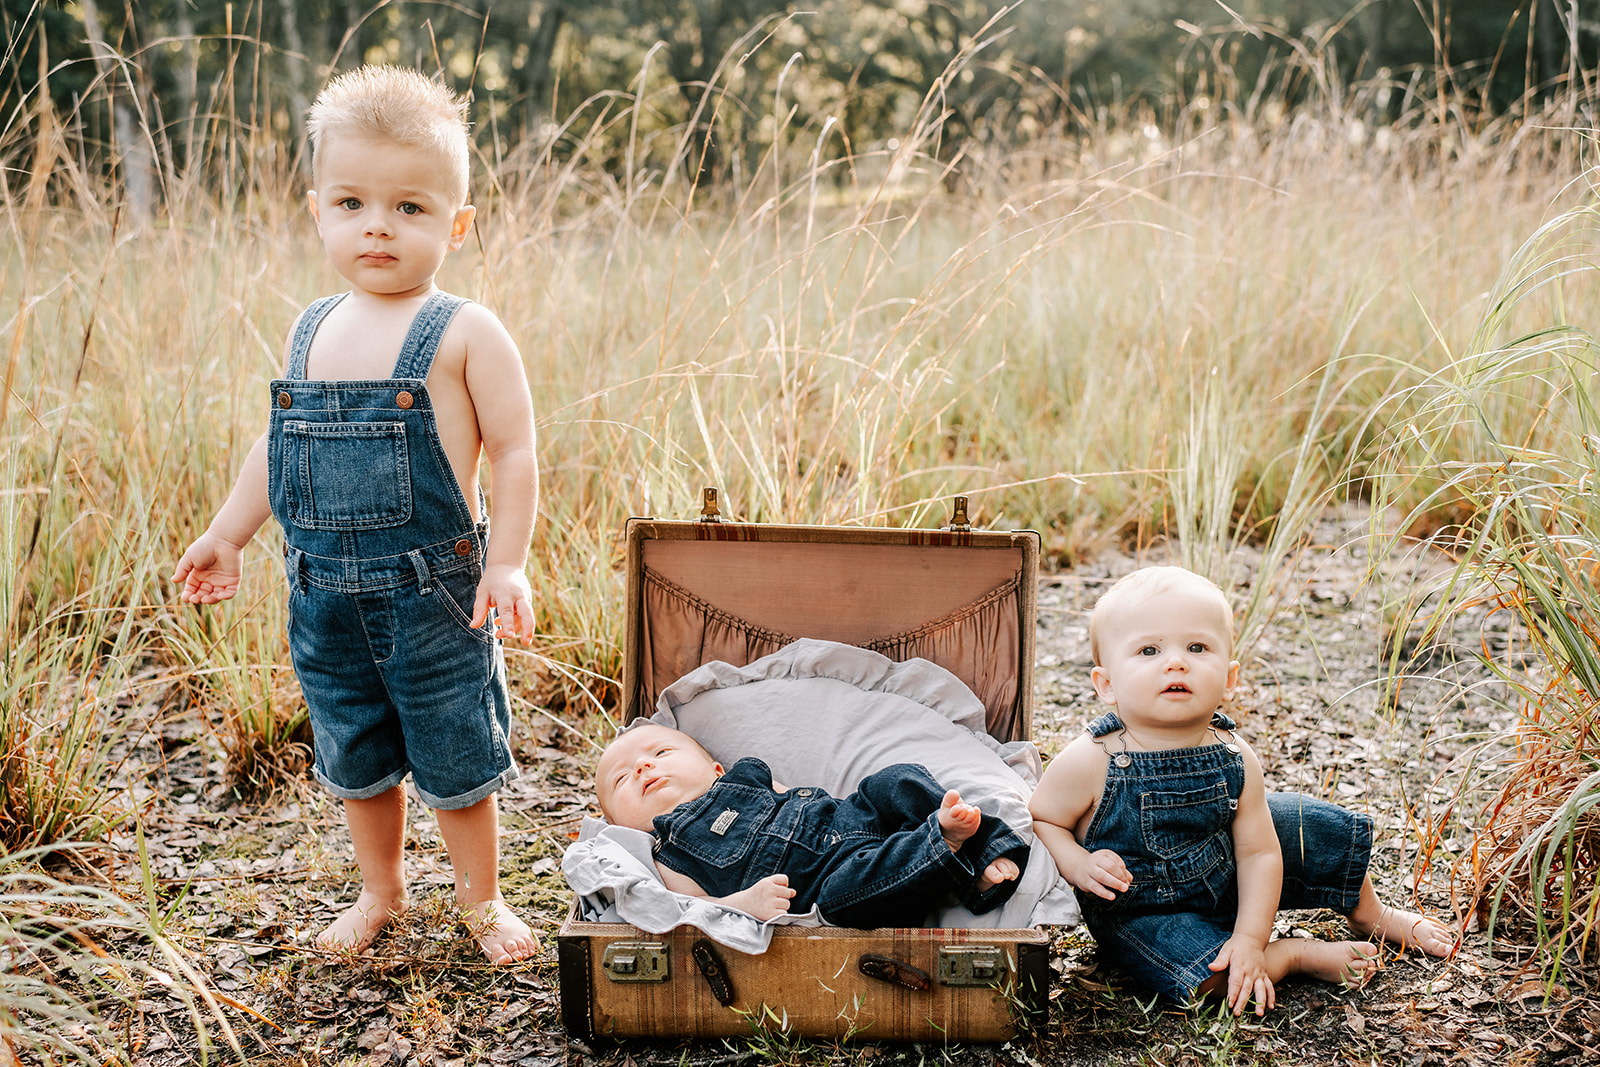 Two young brothers in overalls sit and stand with their sleeping newborn brother in a suitcase while in a field of tall grass